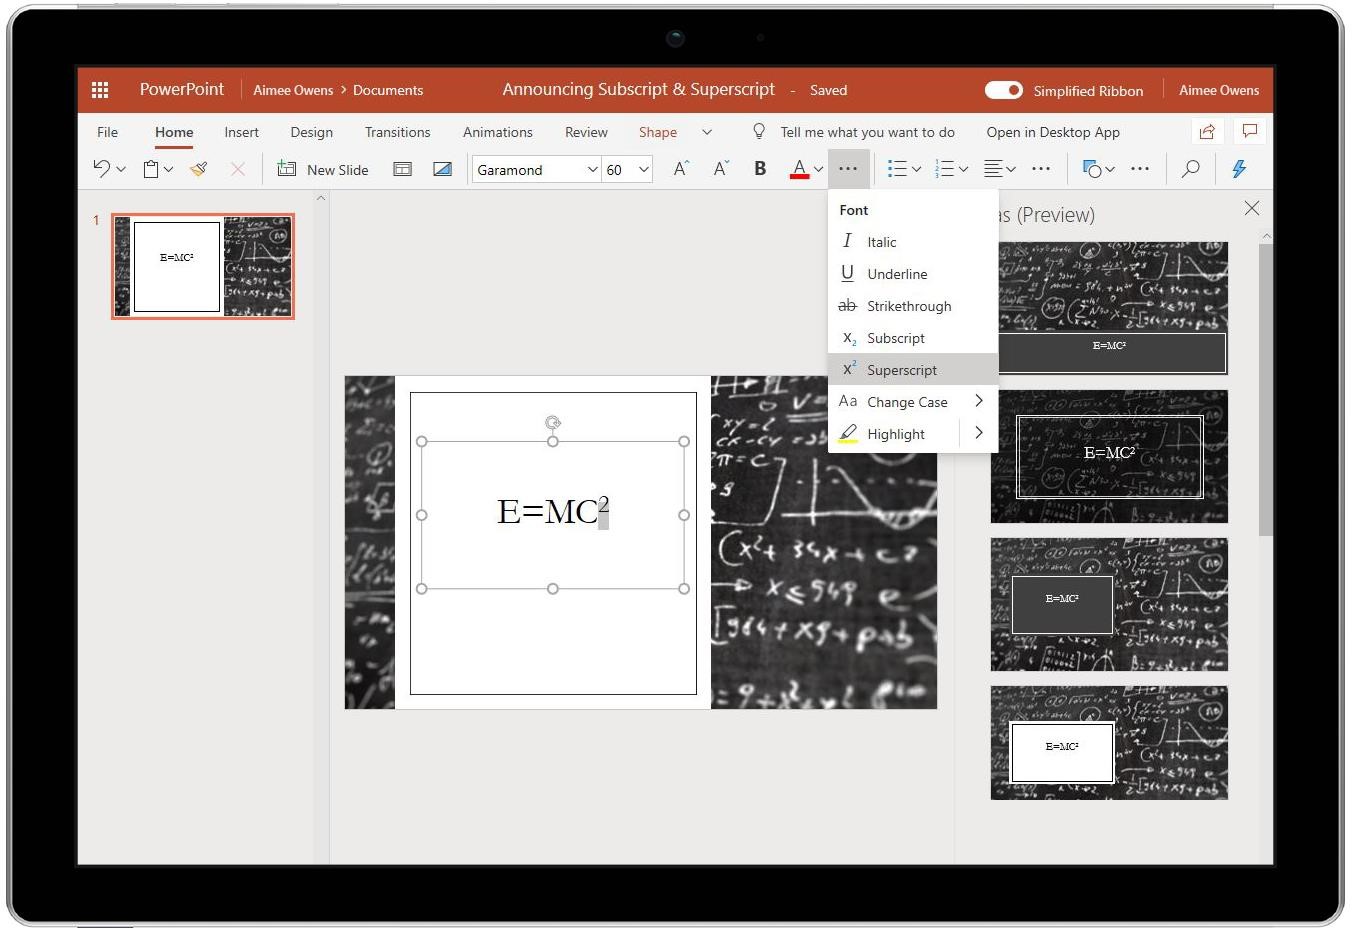 New for PowerPoint on the web